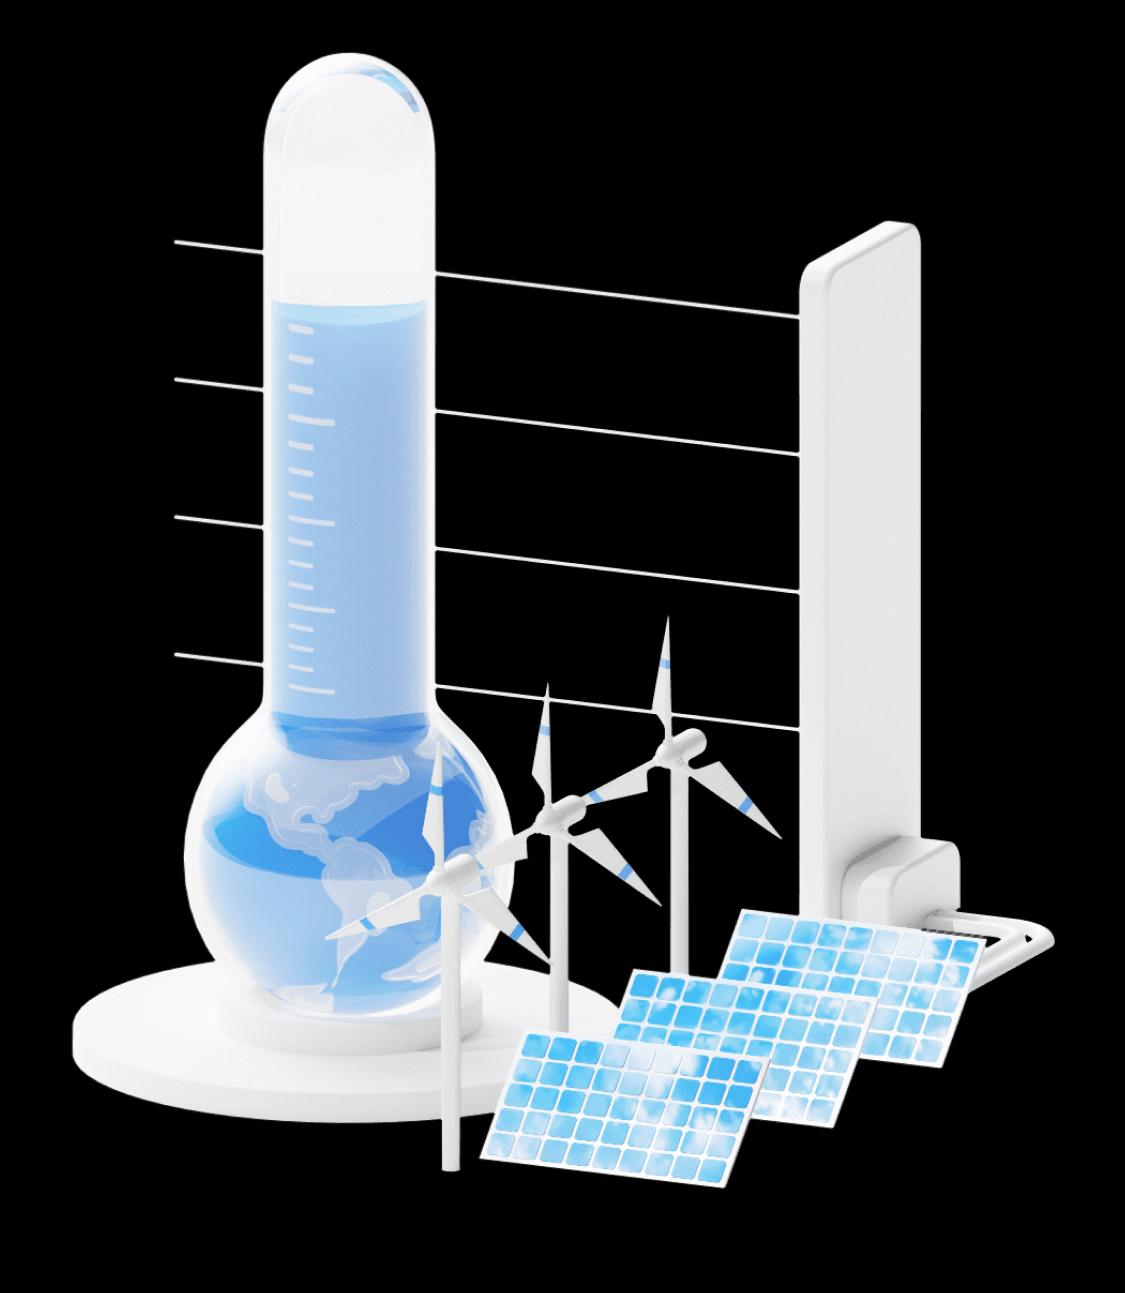 3D image of small scale wind towers and solar panels next to a beaker measuring a blue sky colored liquid